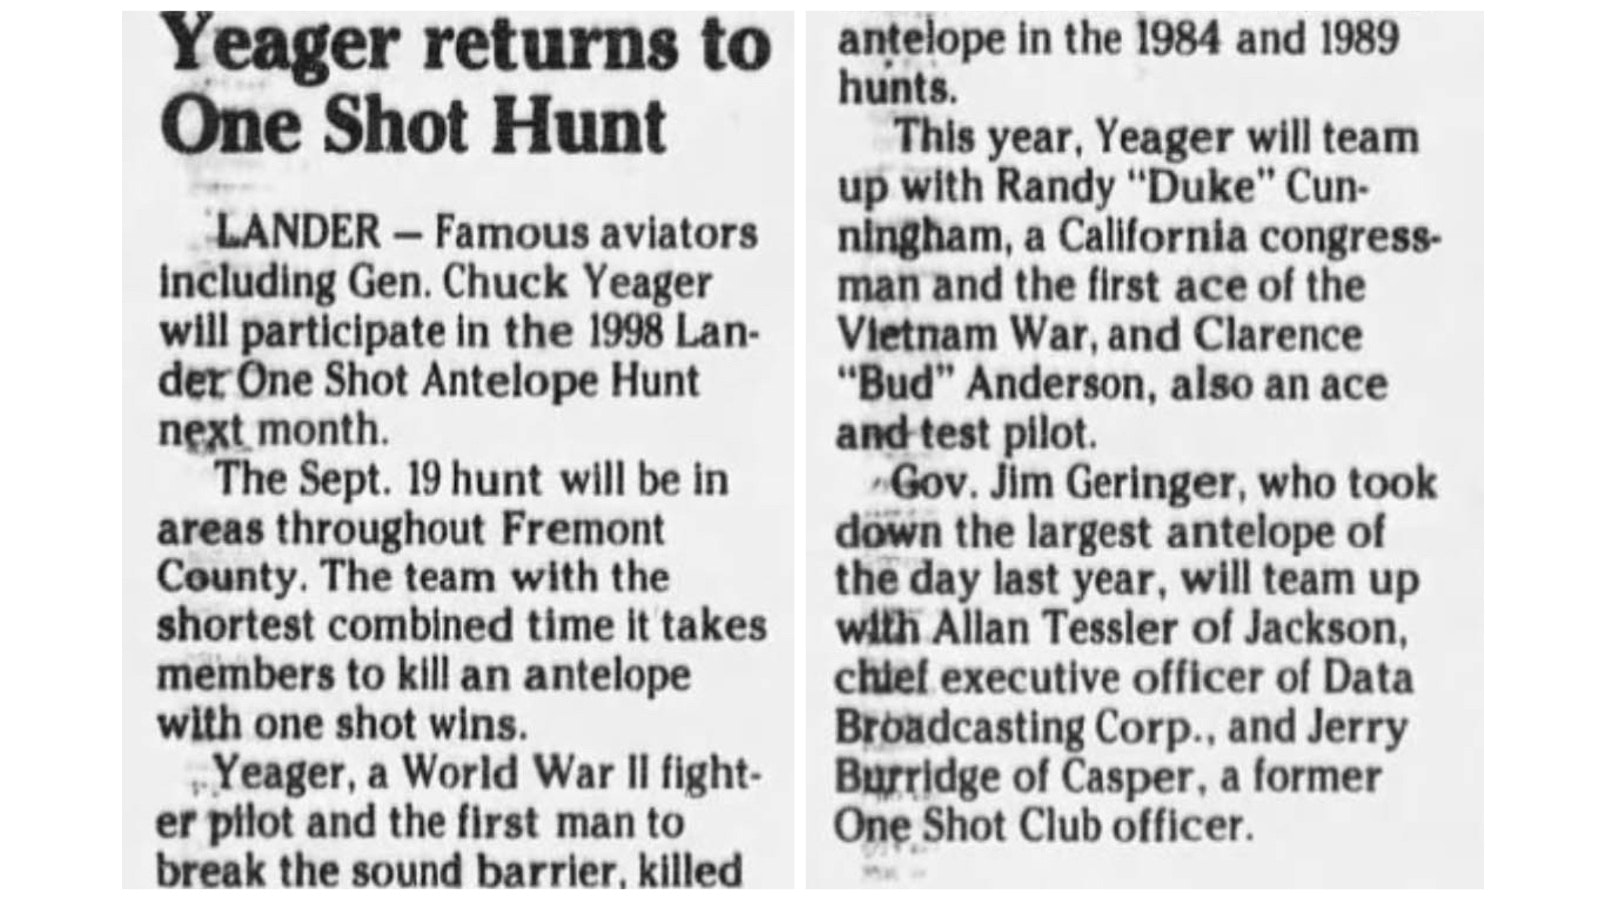 An article in the Casper Star-Tribune on Aug. 26, 1998, chronicles Chuck Yeager’s return to hunt antelope lawfully.